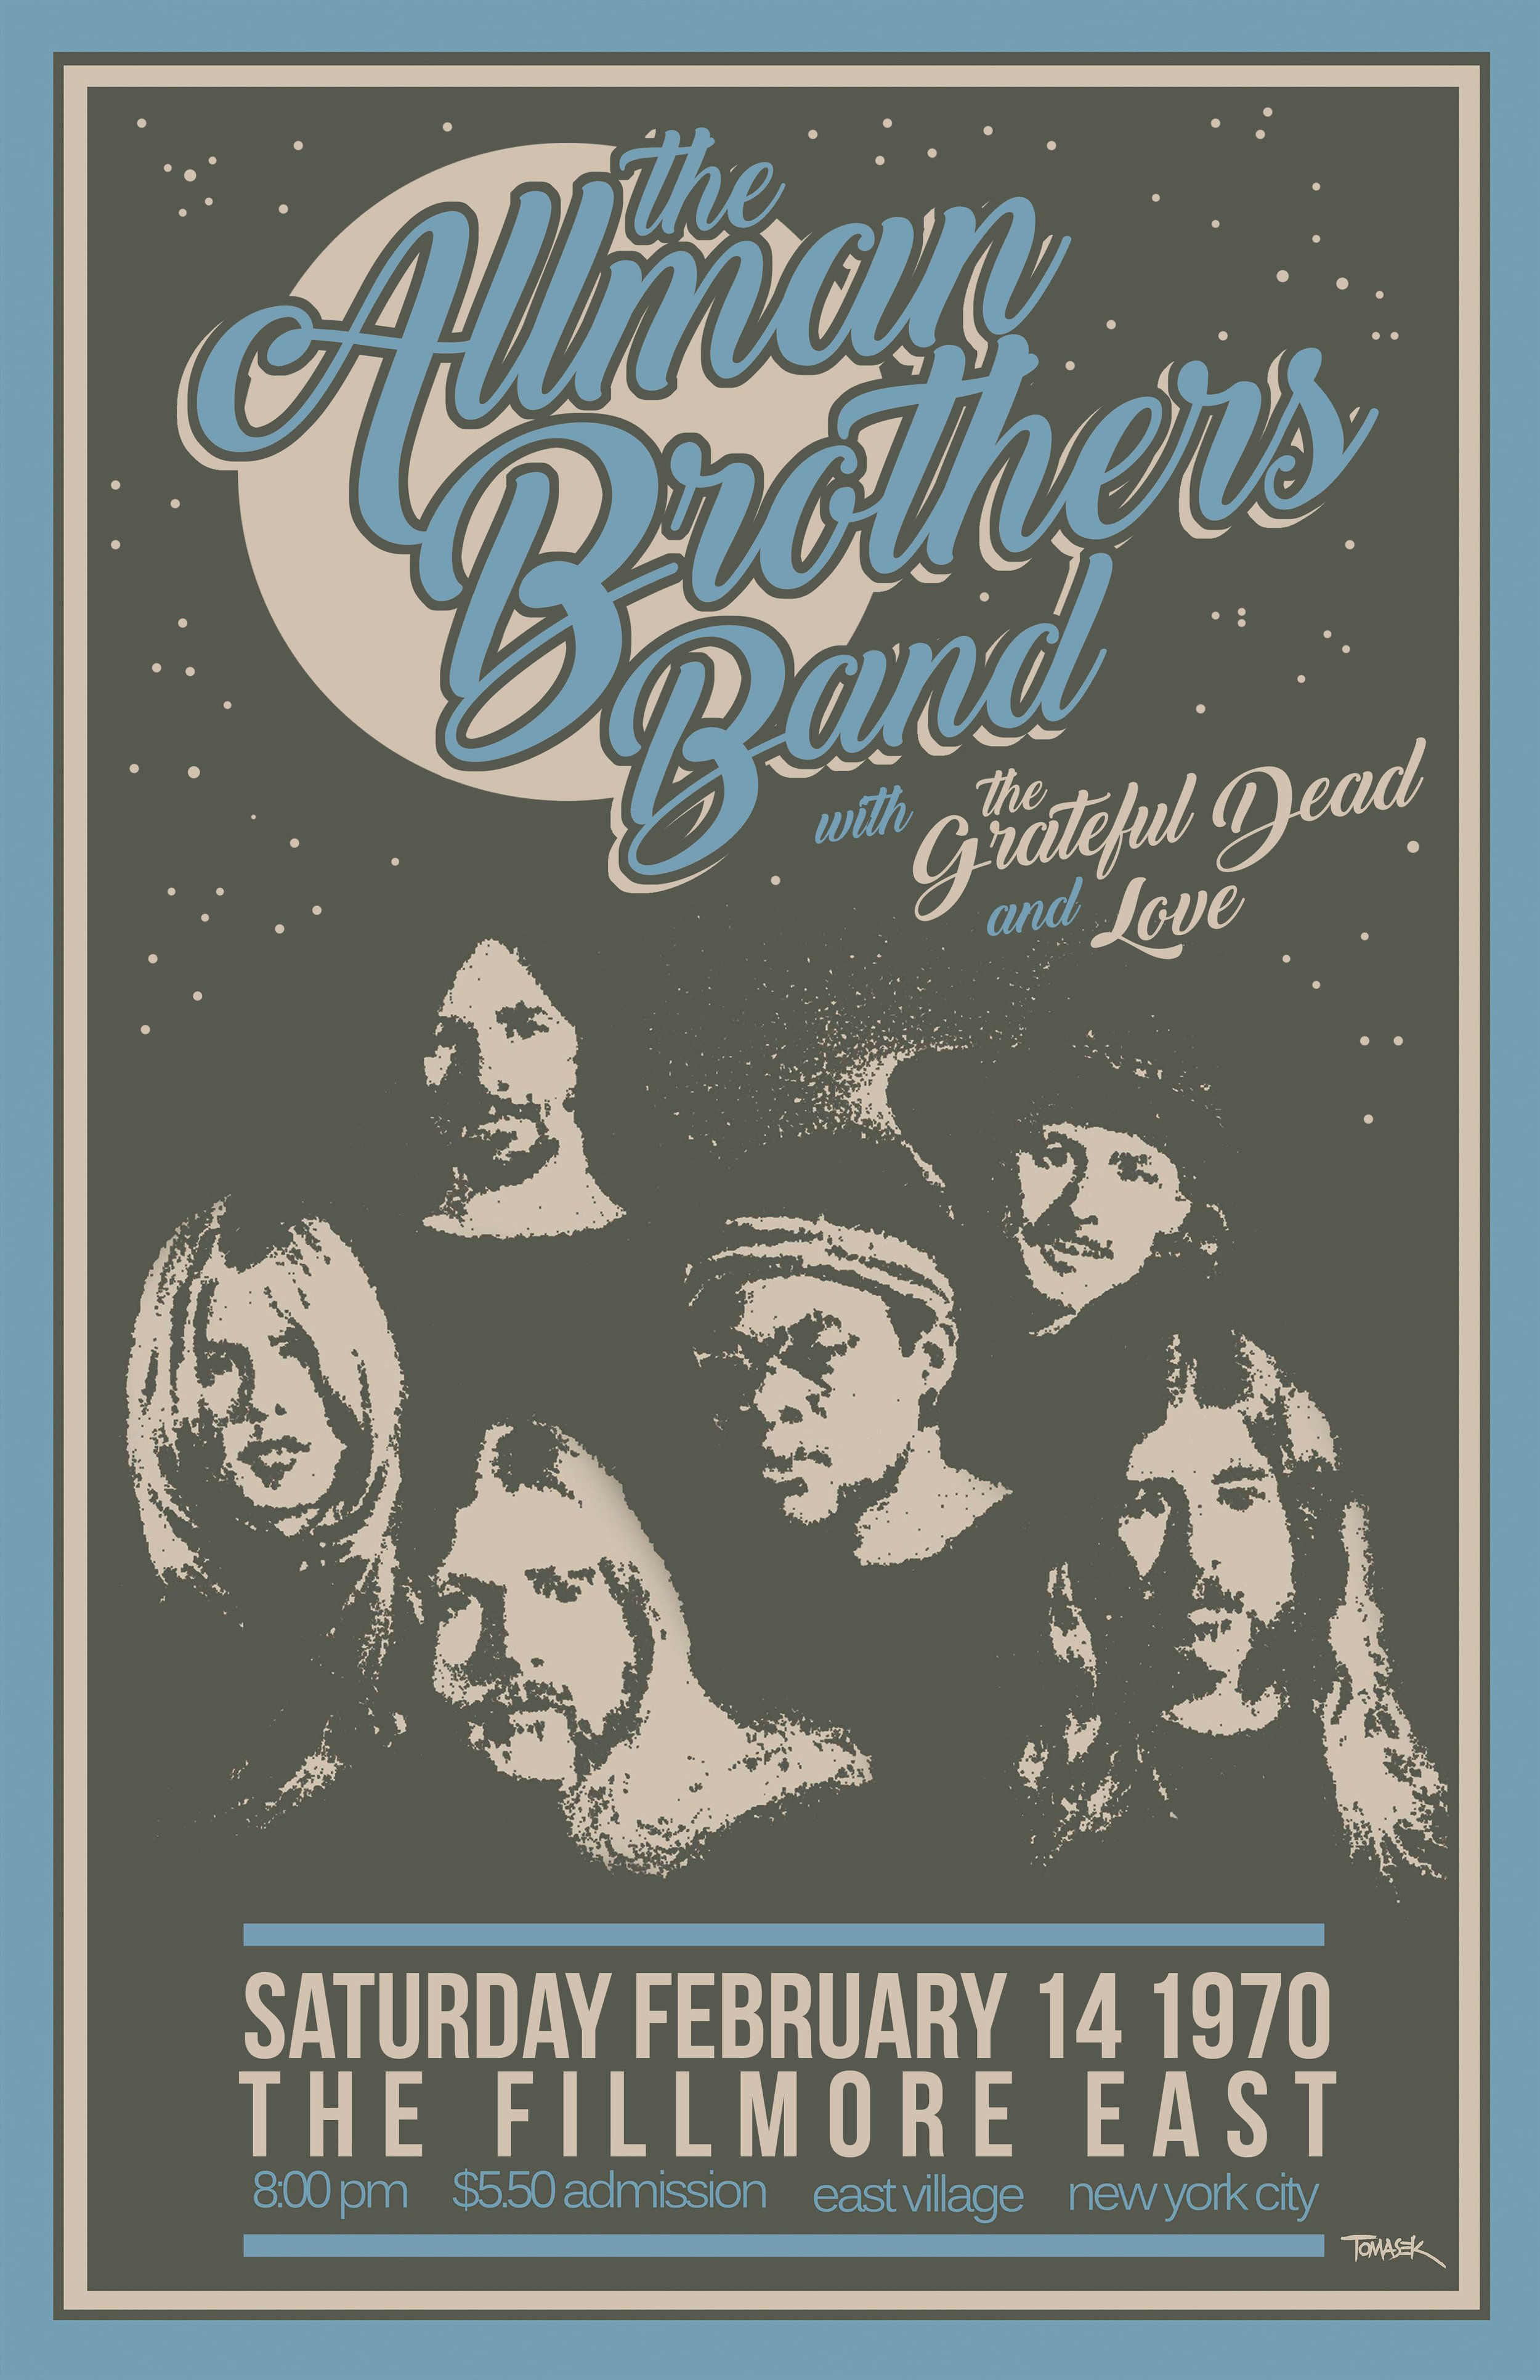 the allman brothers tour